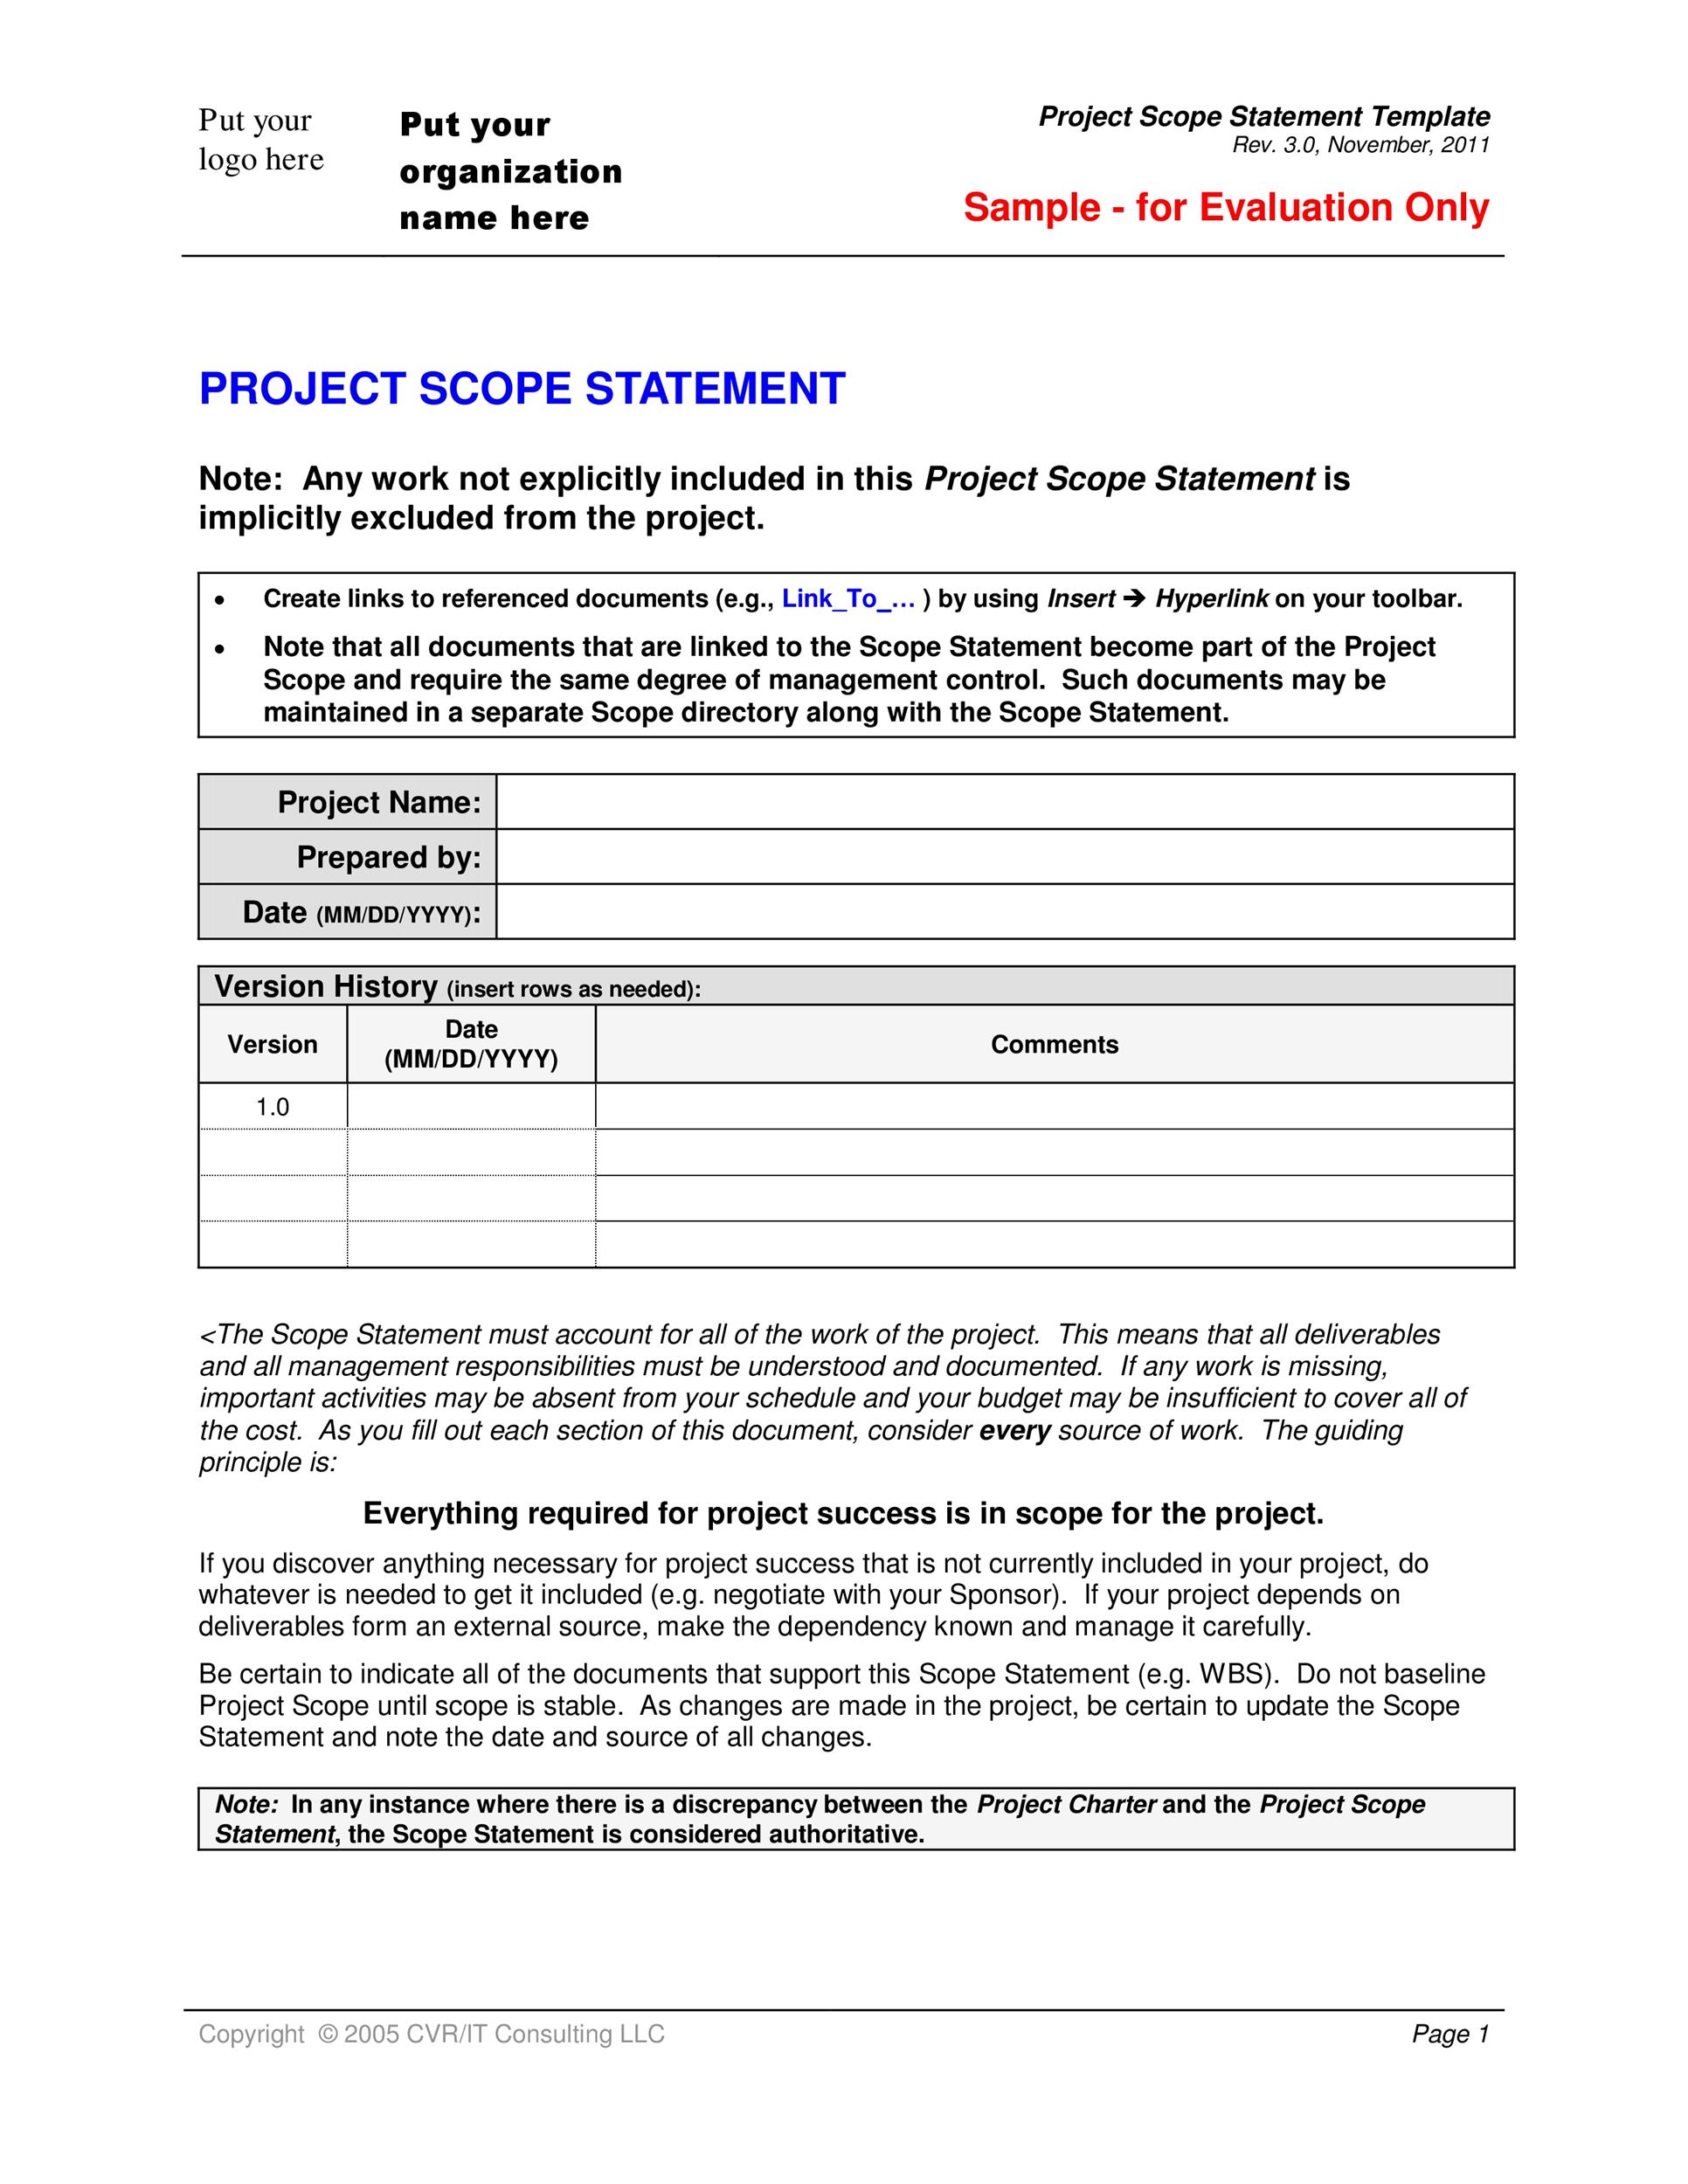 43 Project Scope Statement Templates Examples ᐅ TemplateLab